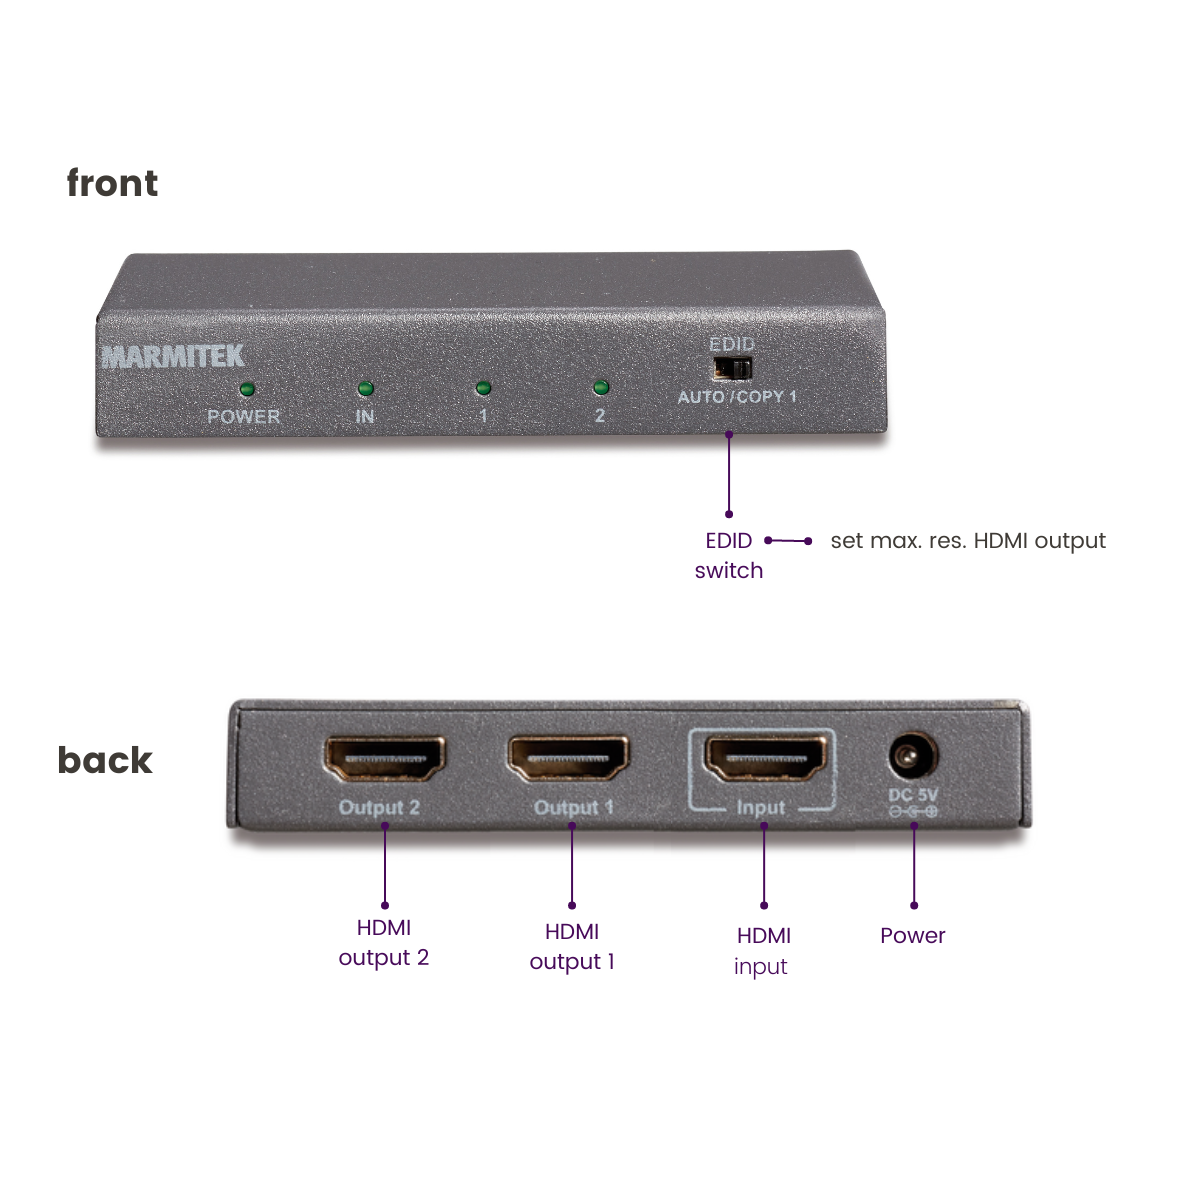 Split 612 UHD 2.0 - 4K HDMI splitter 1 in / 2 out - Connections Image with text | Marmitek